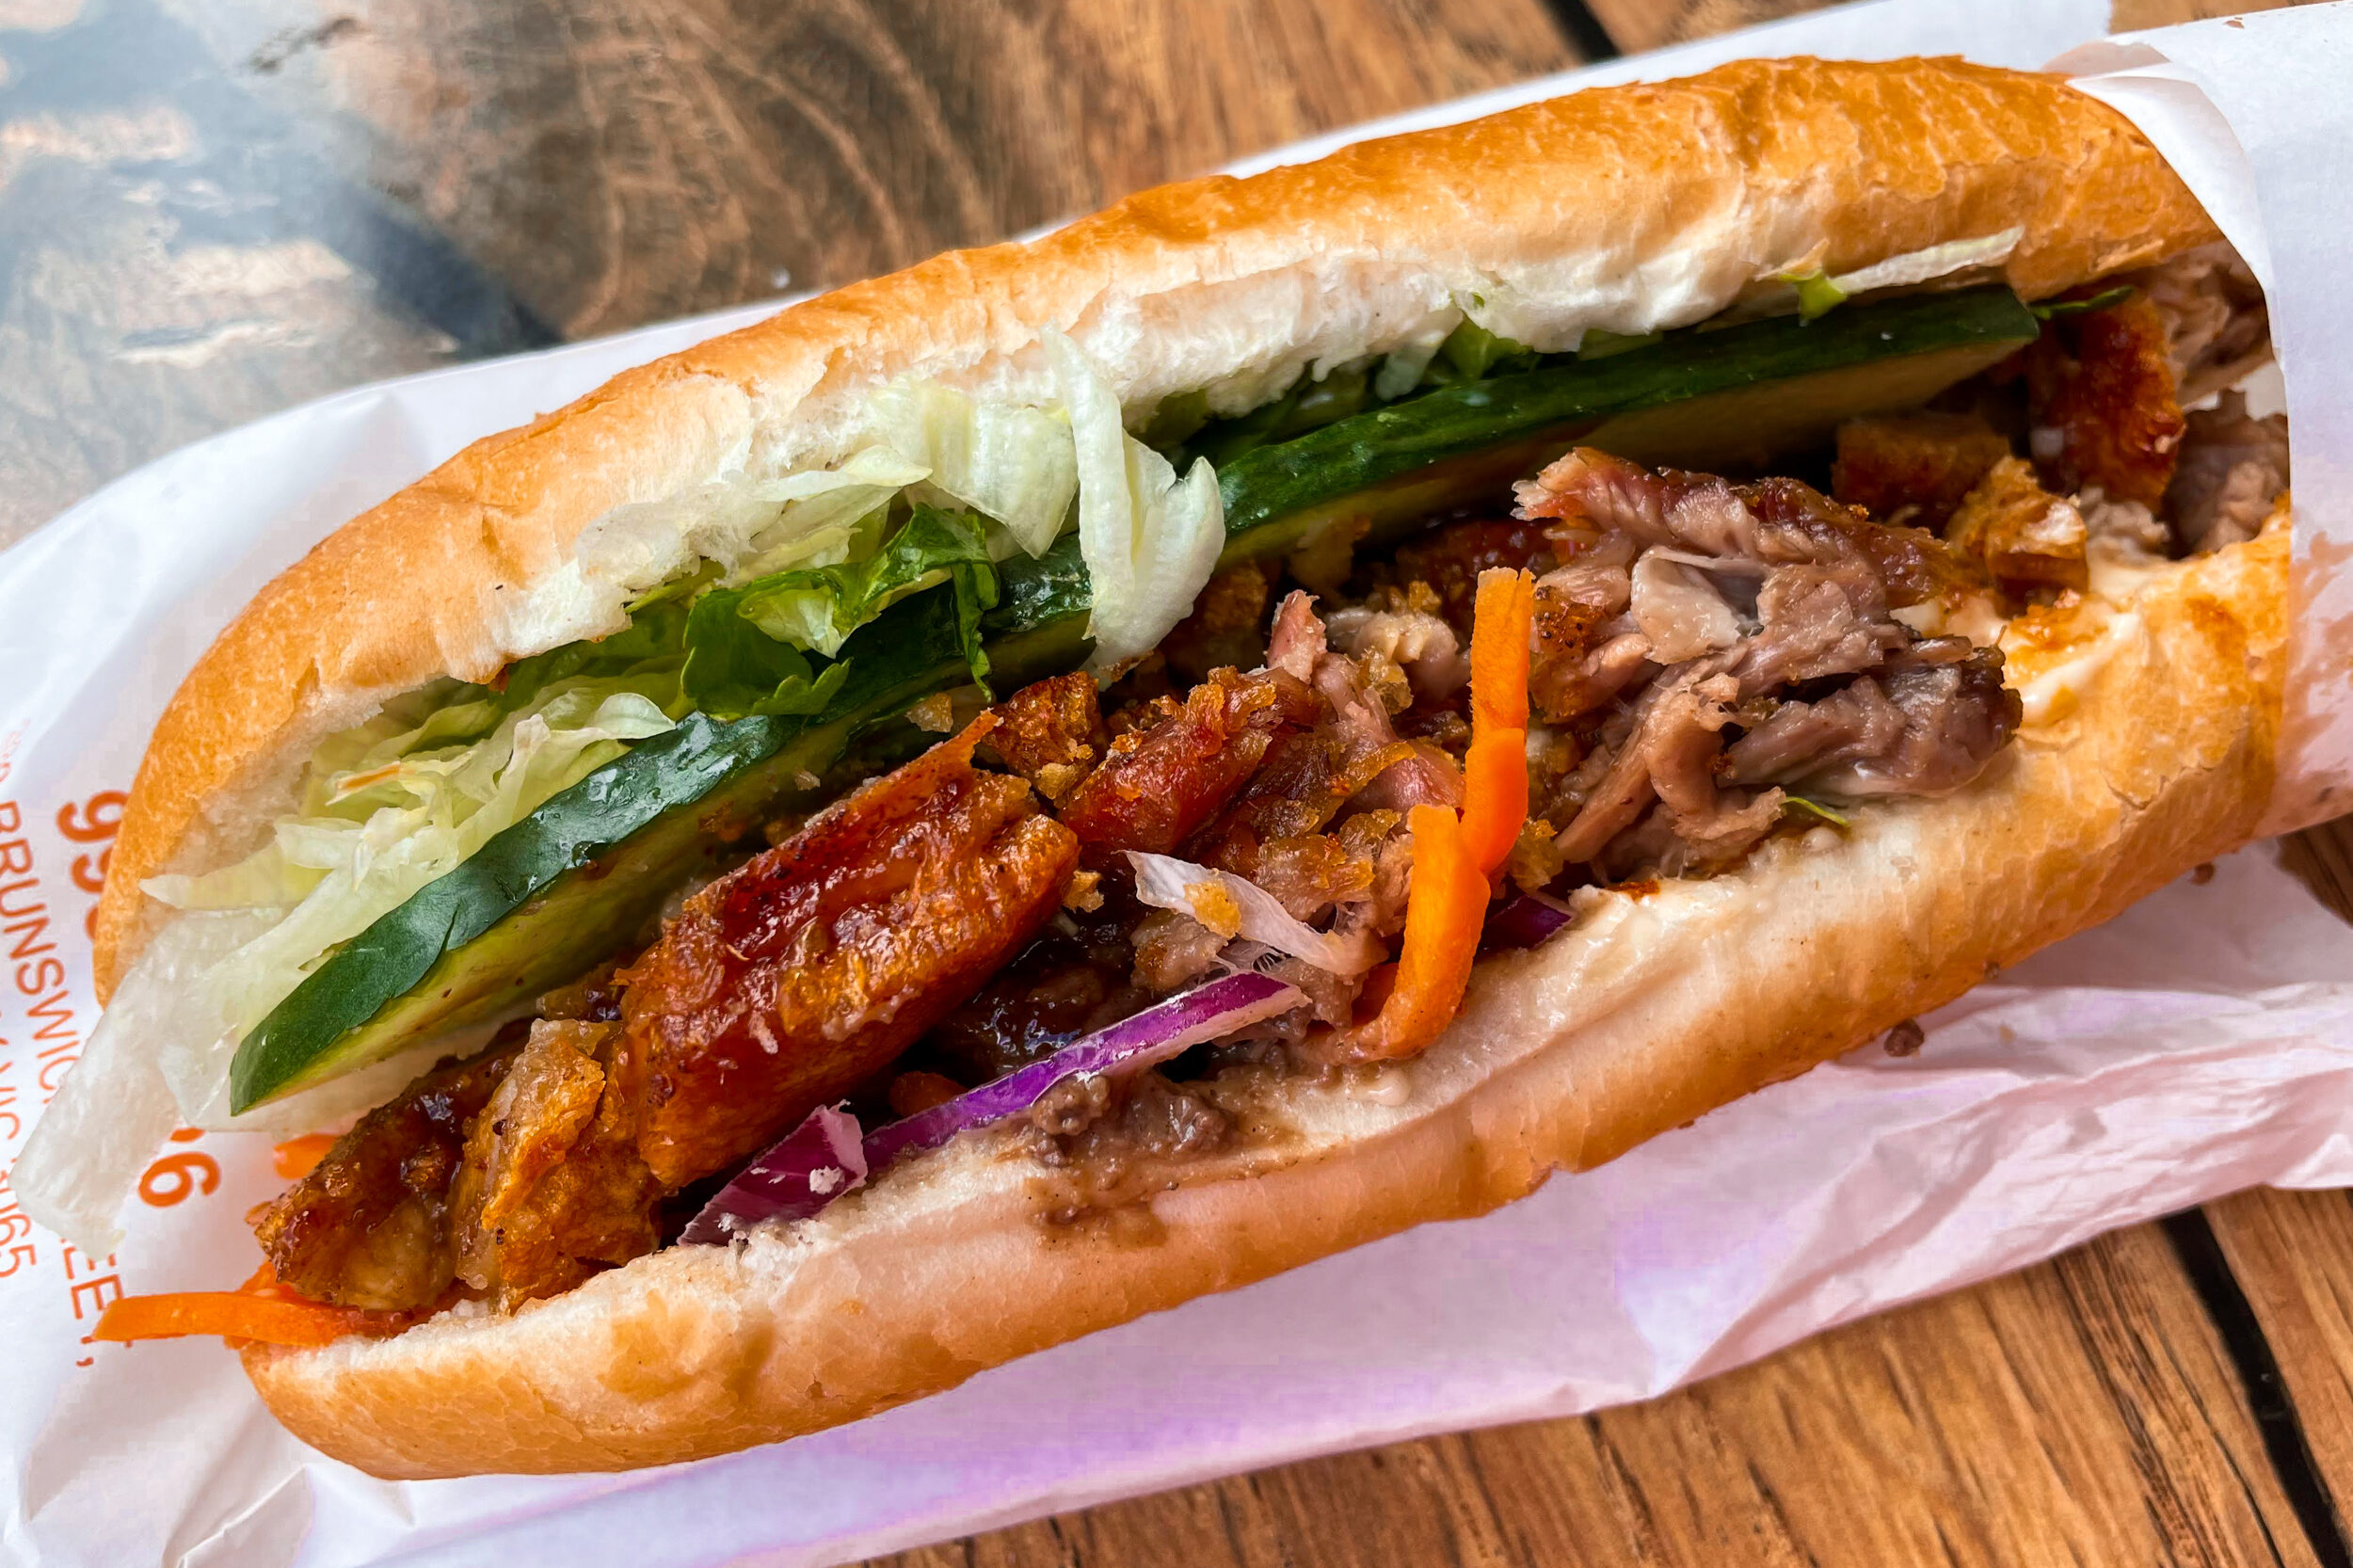 Banh mi bread roll with pork, red onion, and other fillings, sitting on paper bag on wooden table